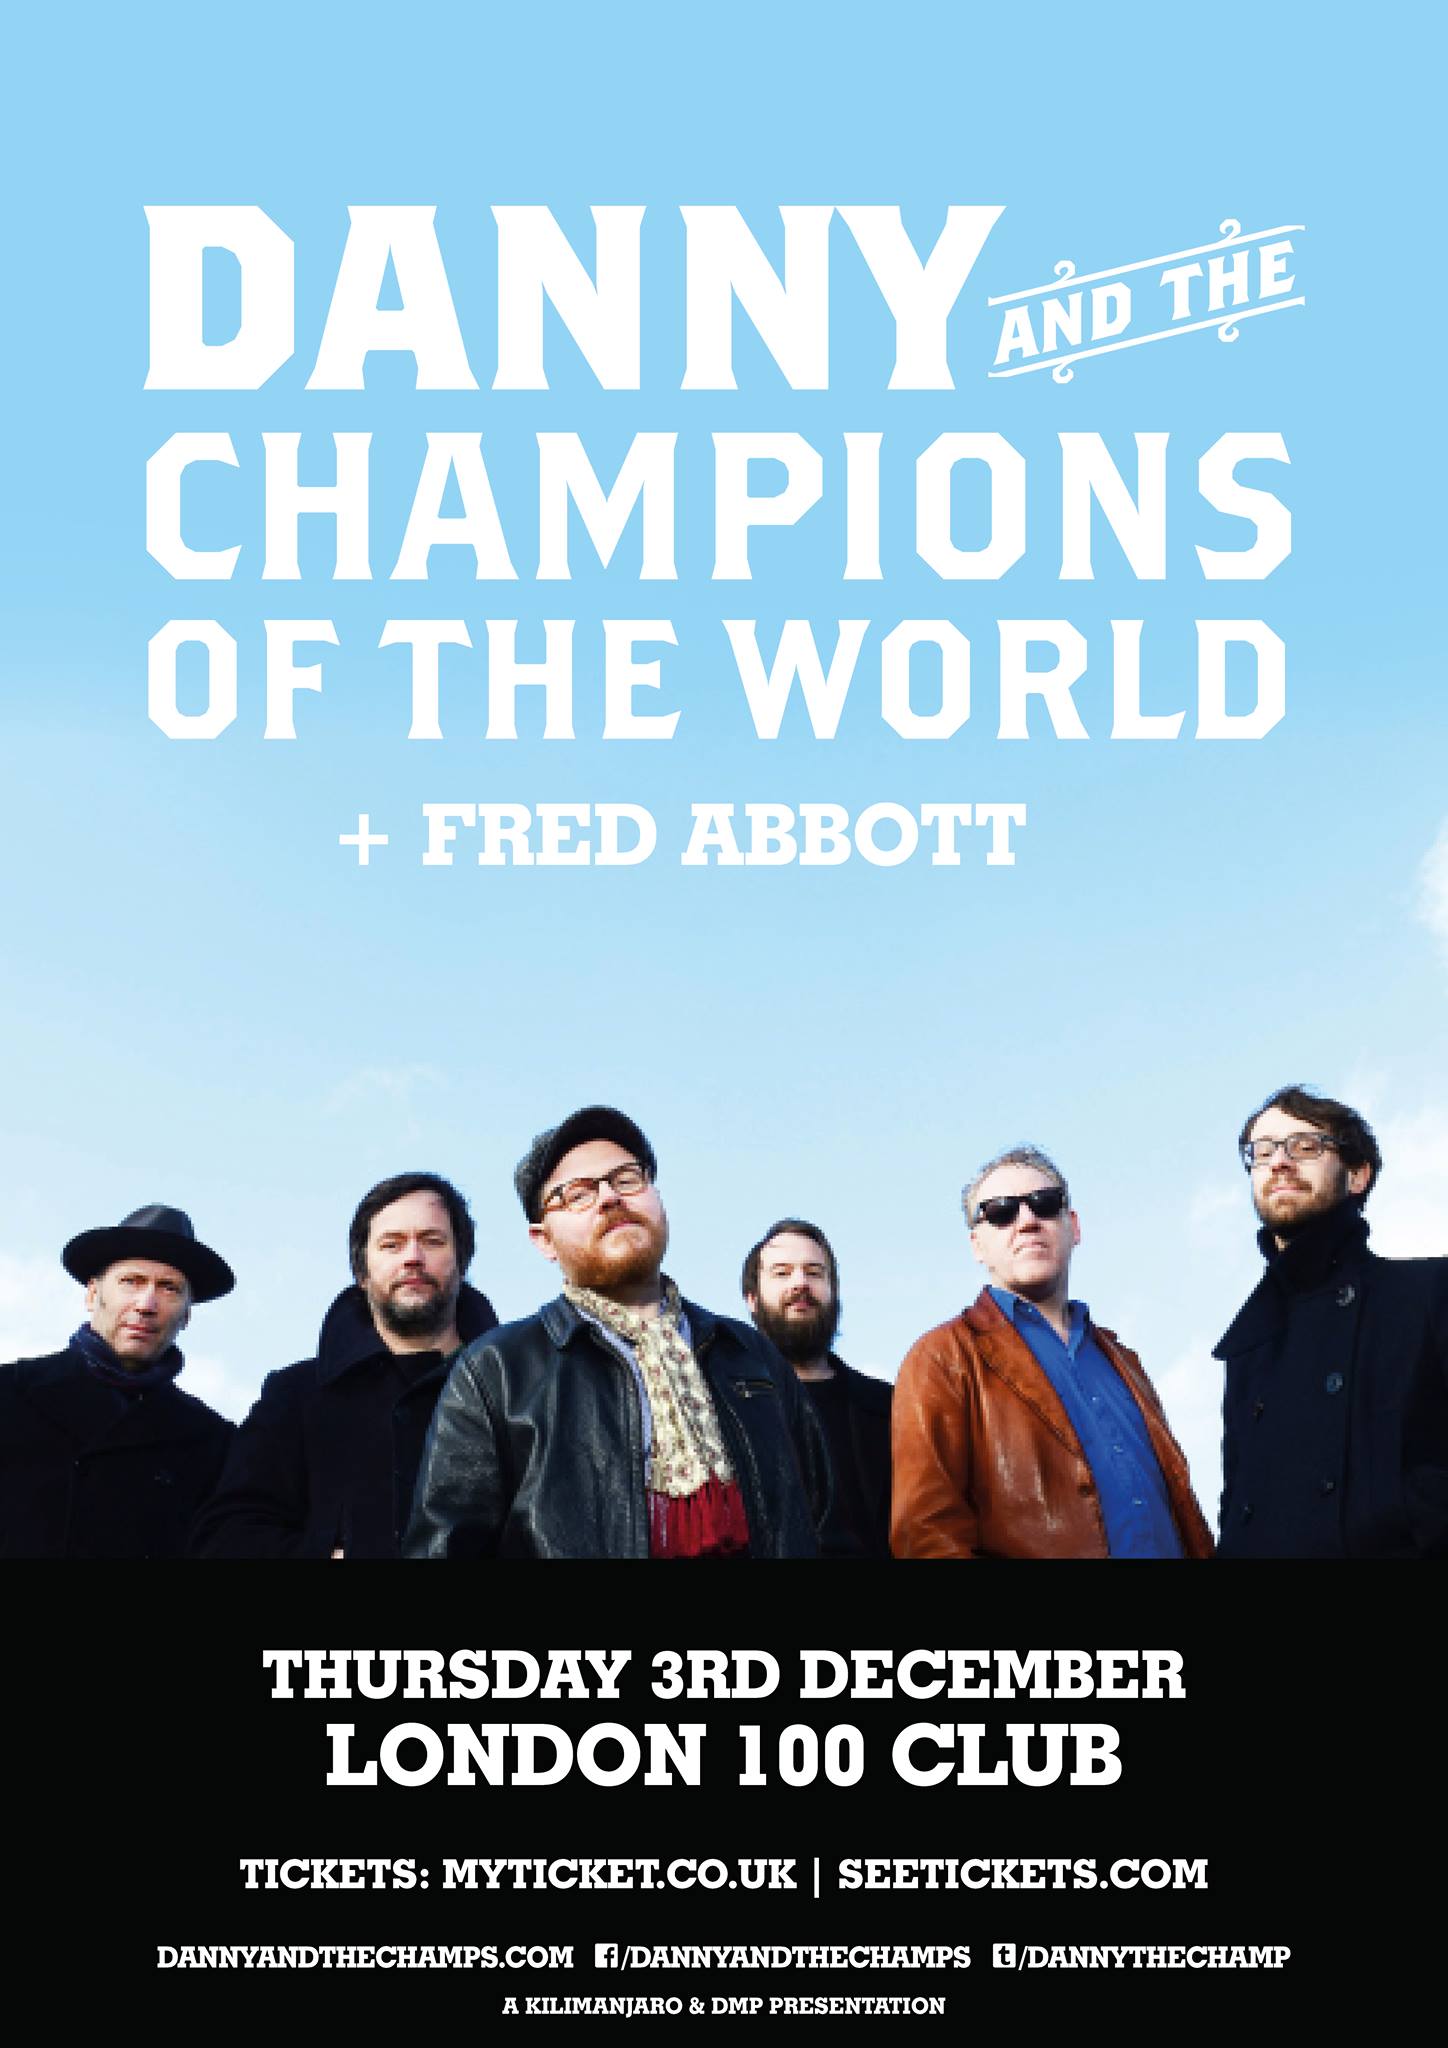 Danny & The Champions of the World & Fred Abbott